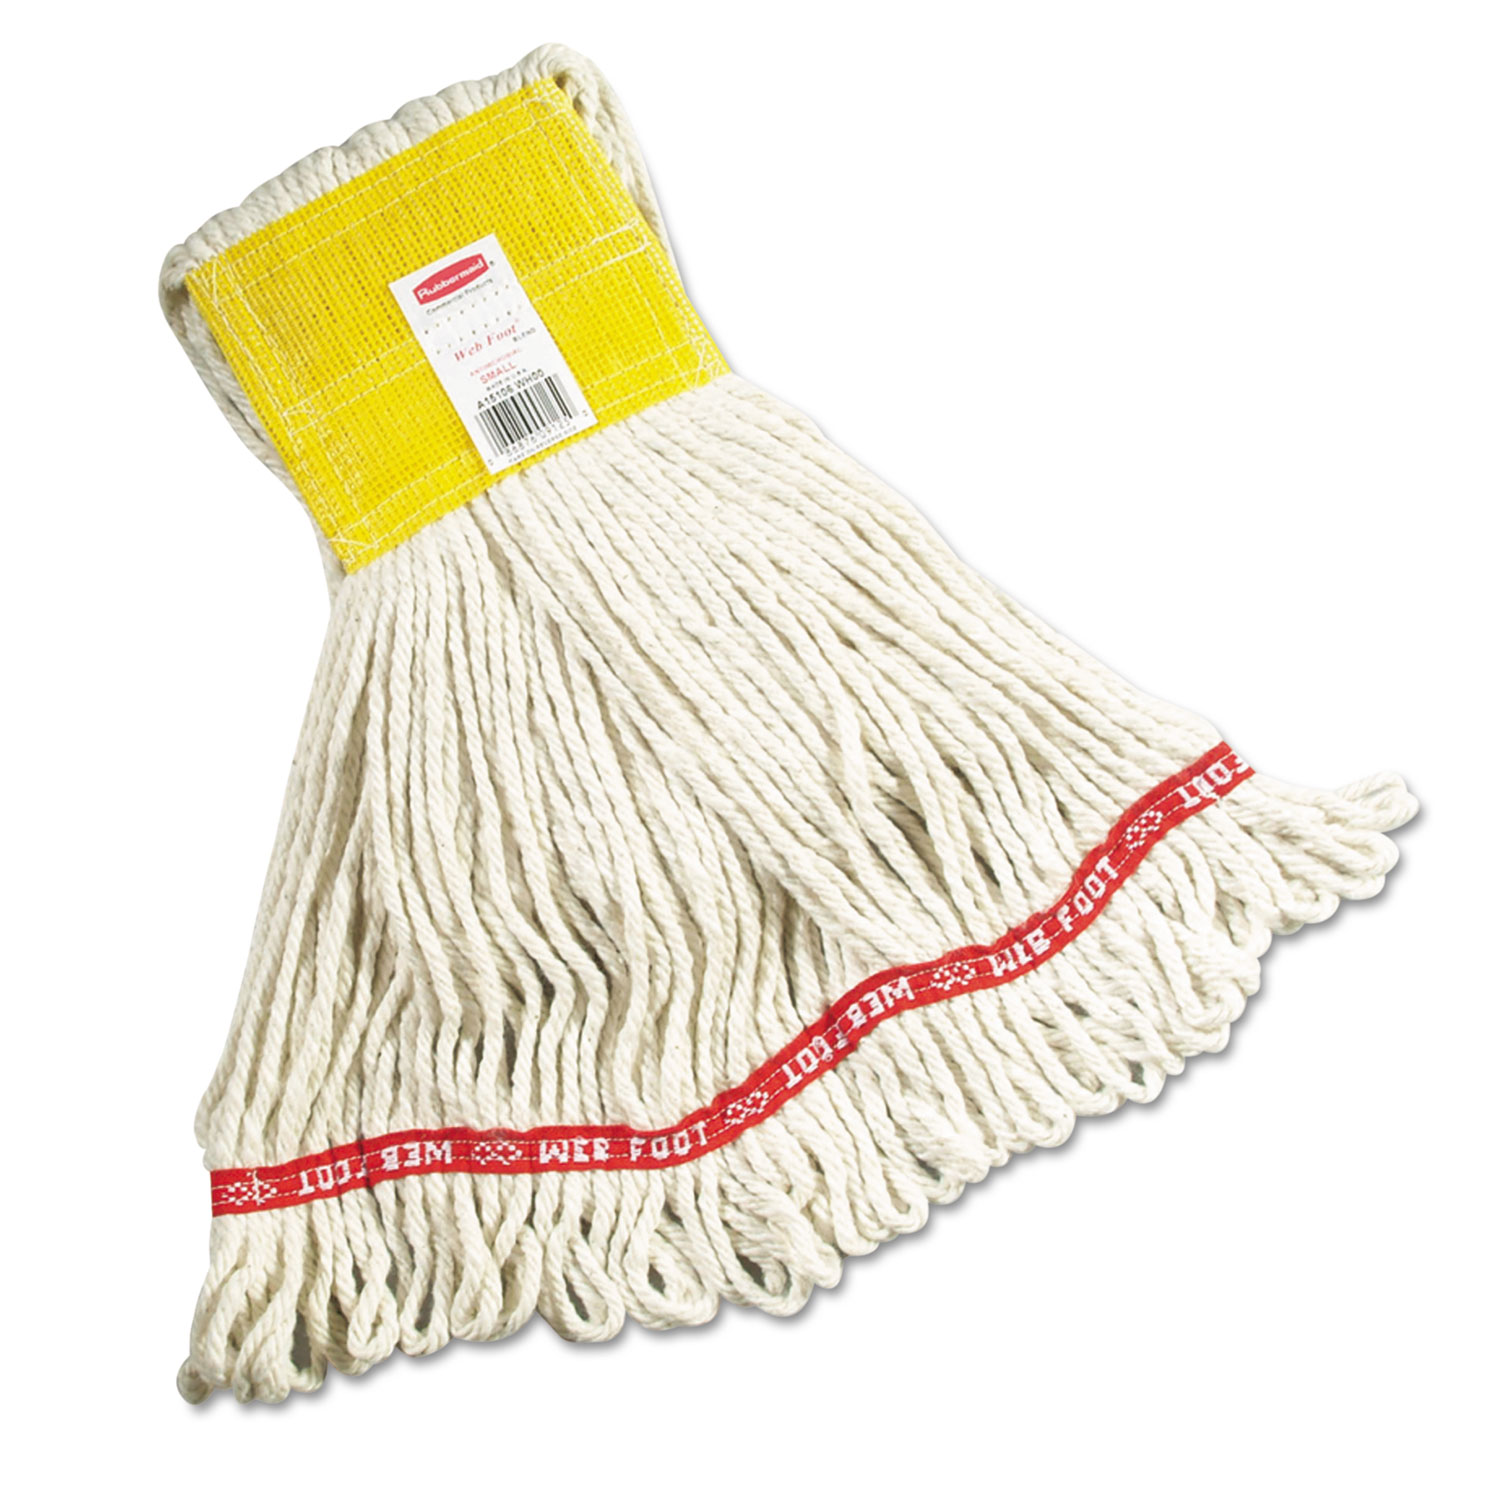  Rubbermaid Commercial FGA15106WH00 Web Foot Wet Mops, Cotton/Synthetic, White, Small, 5-in. Yellow Headband (RCPA151WHI) 